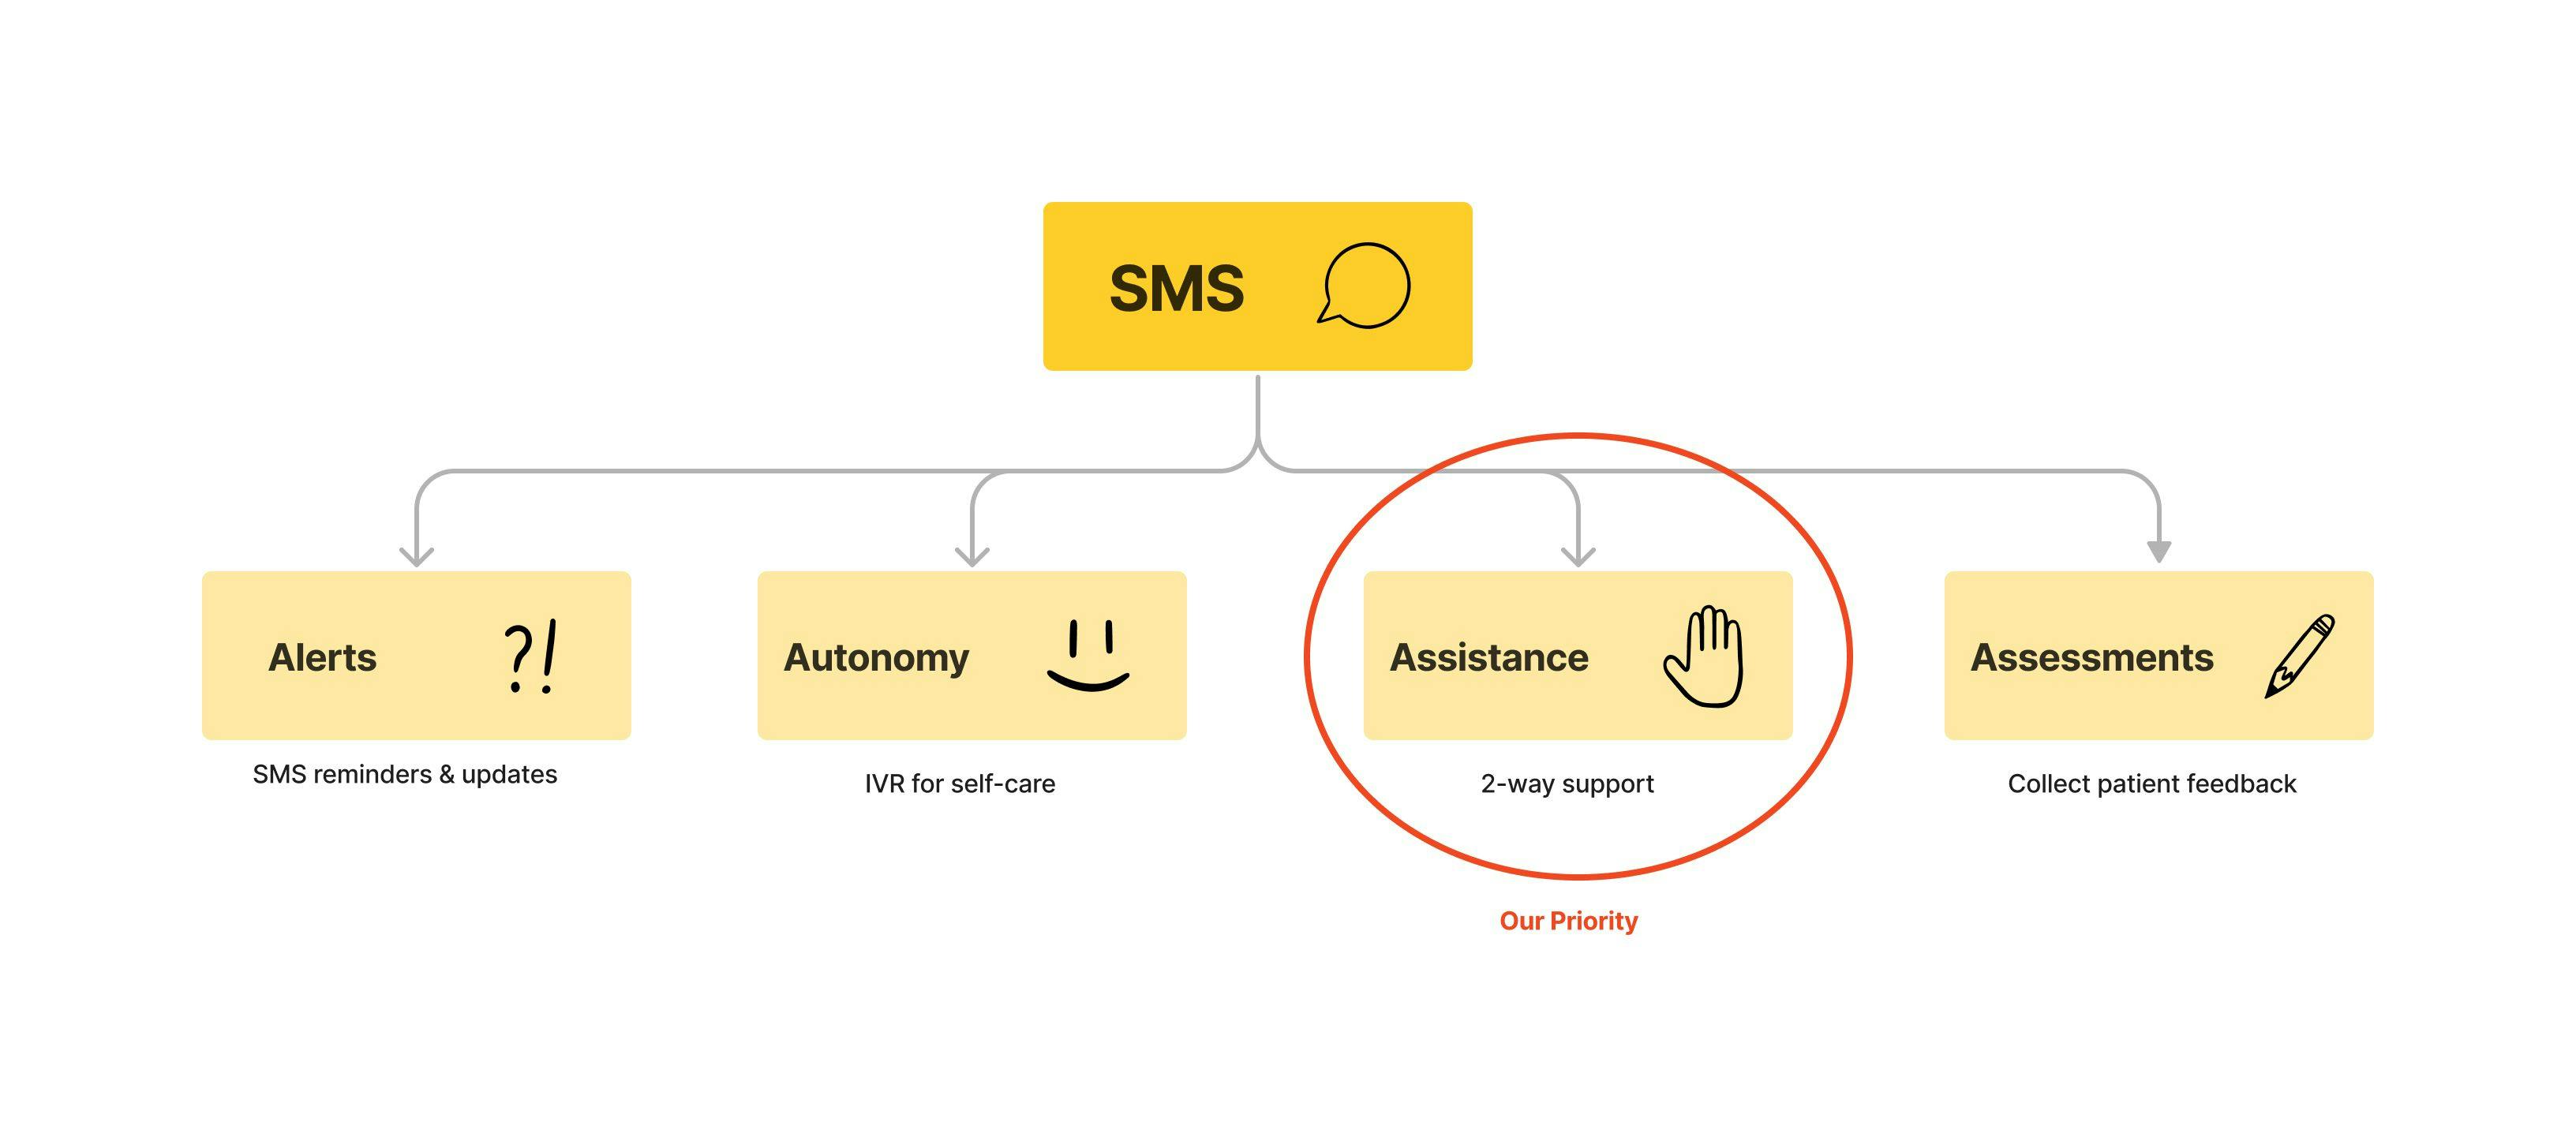 SMS figure: Alerts, Autonomy, Assistance and Assessments | Image credit: Michael Rubio, PA-C